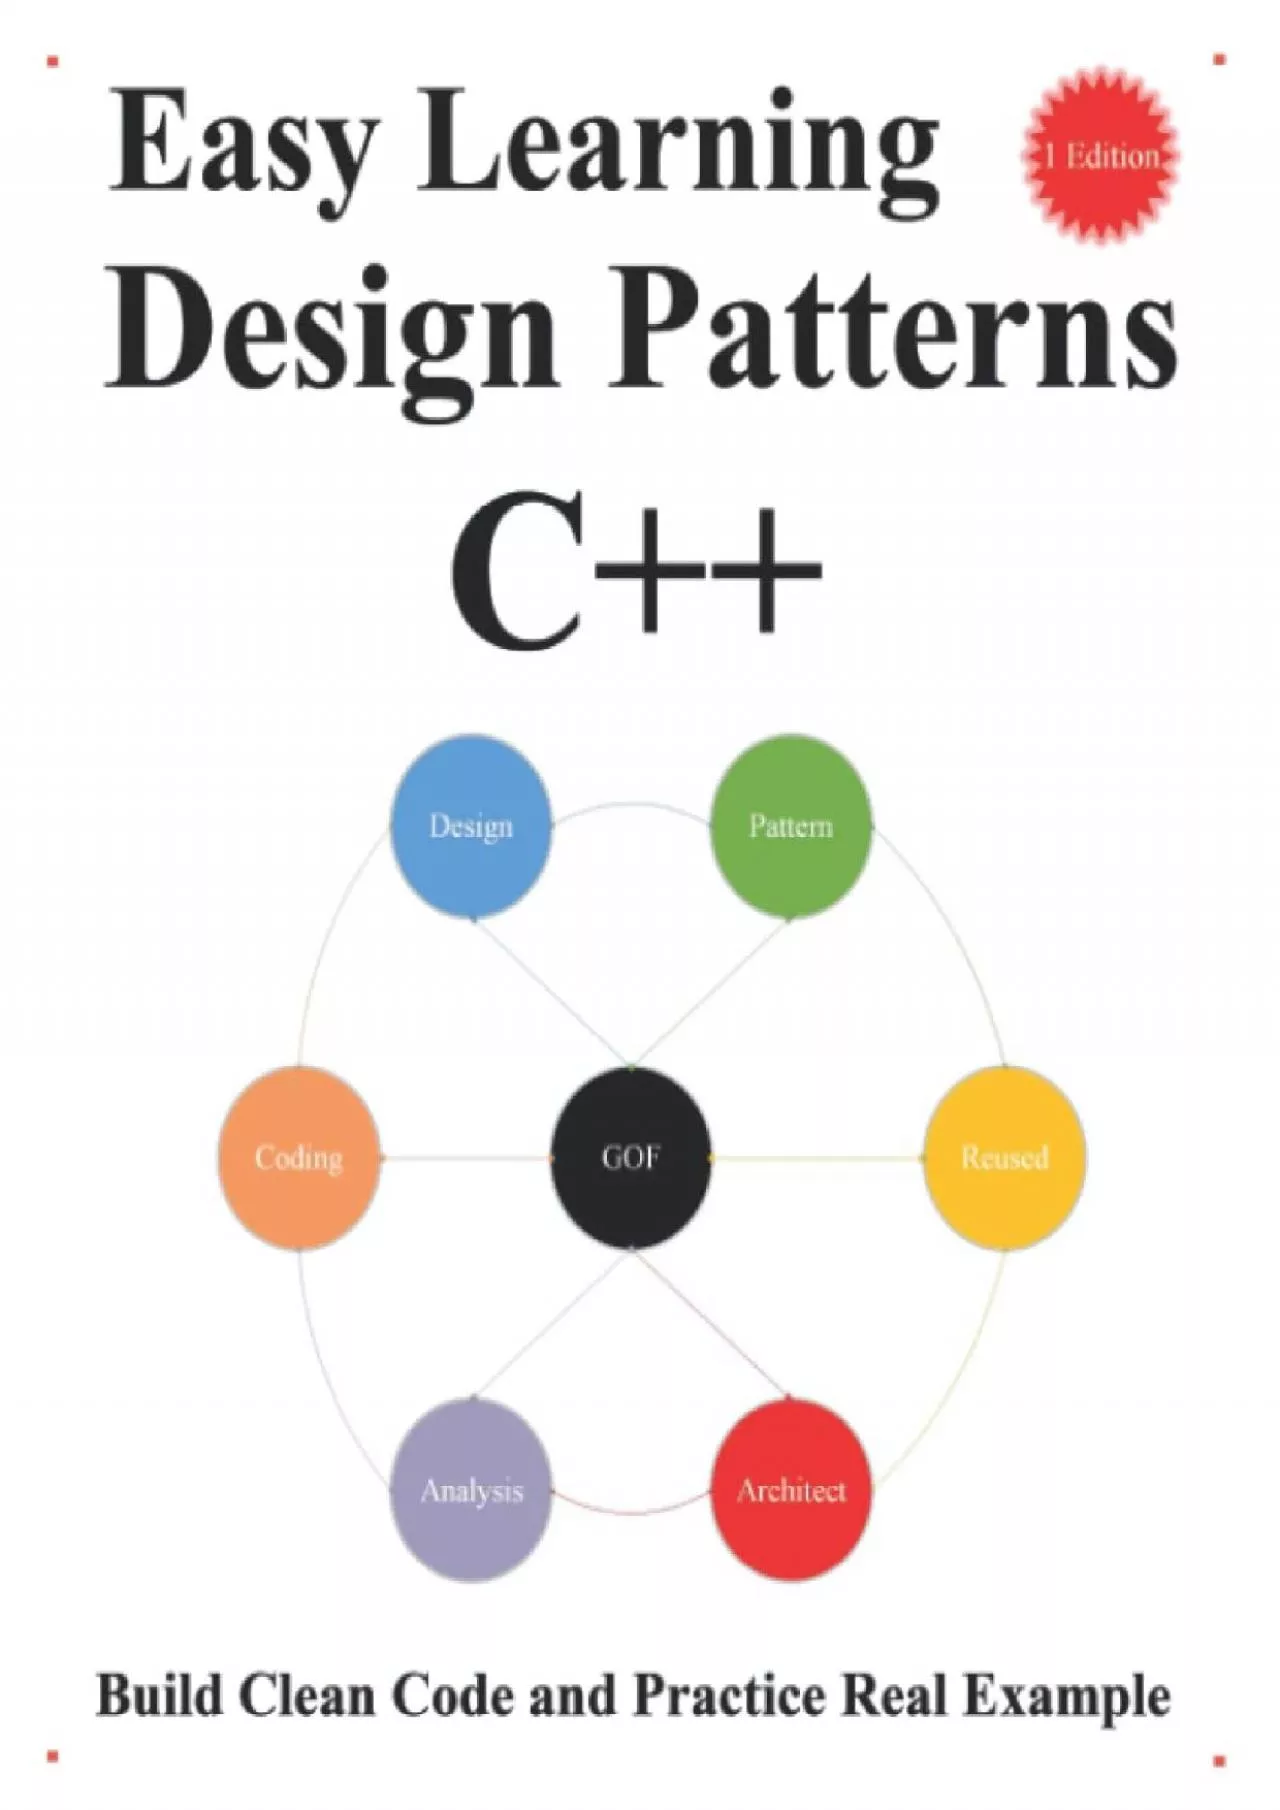 [READ]-Easy Learning Design Patterns C++ (1 Edition): Build Clean Code and Practice Real